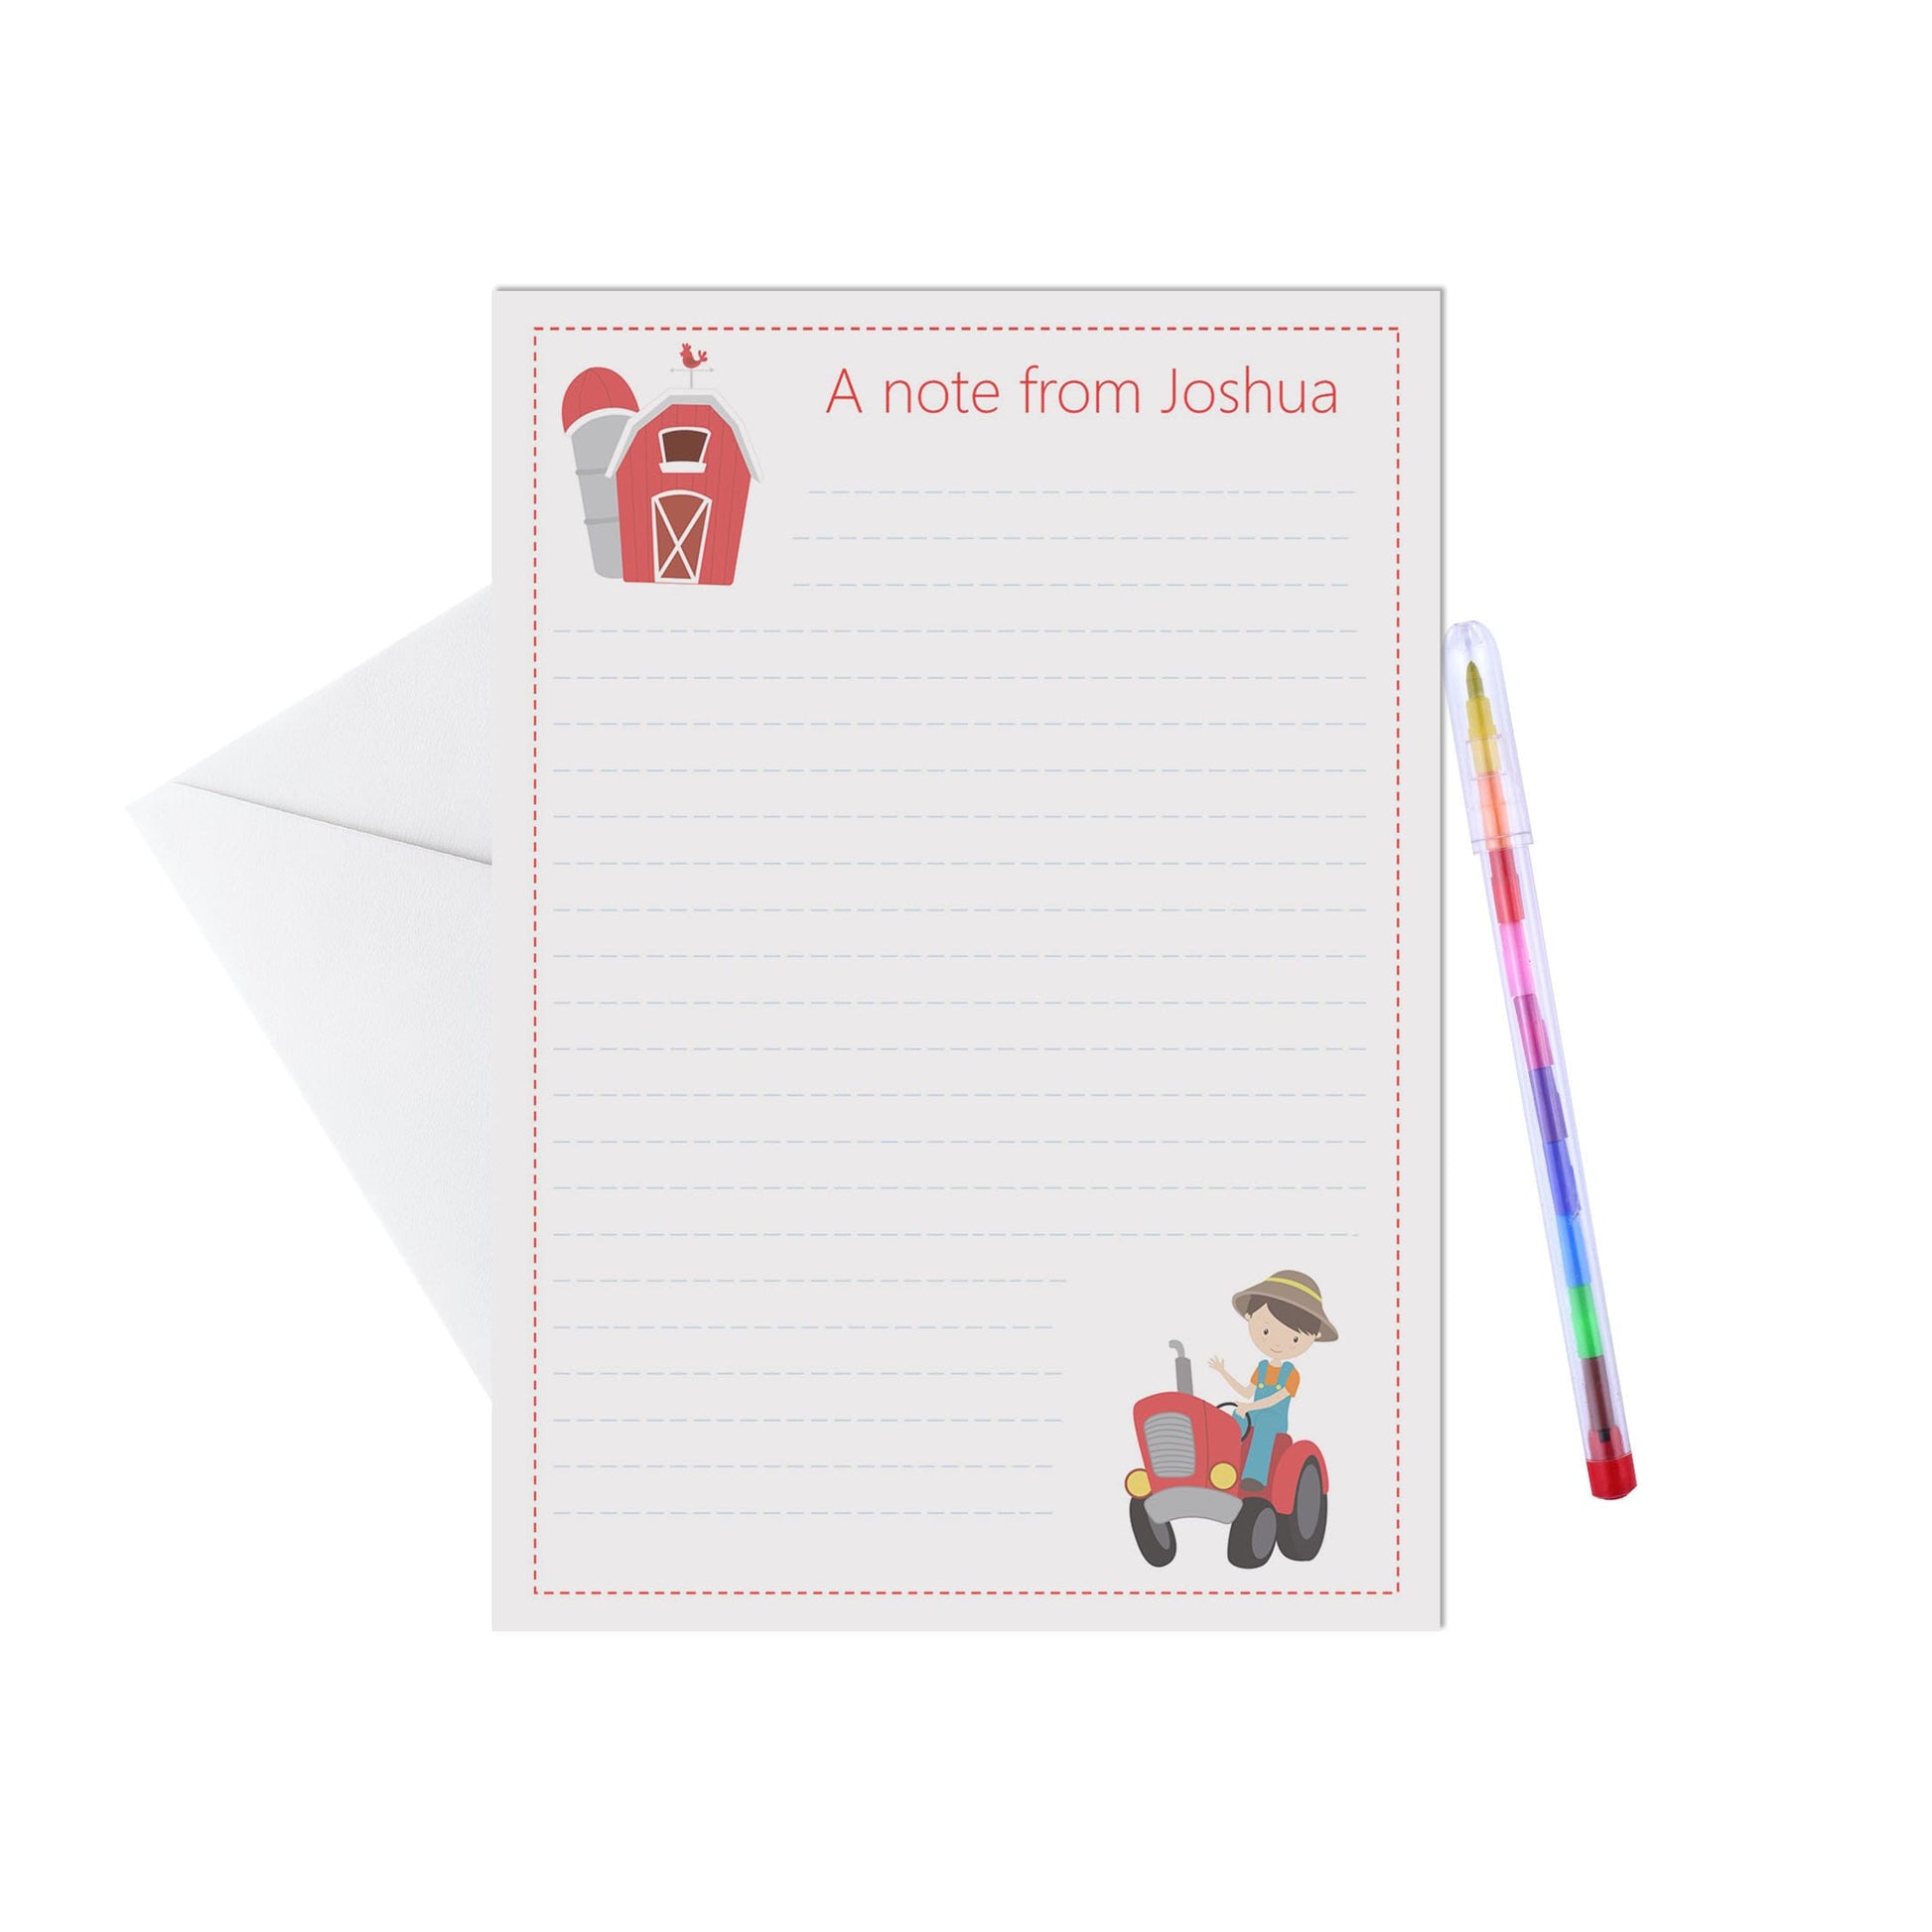  Tractor Personalised Letter Writing Set - A5 Pack Of 15 Sheets & Envelopes by PMPRINTED 